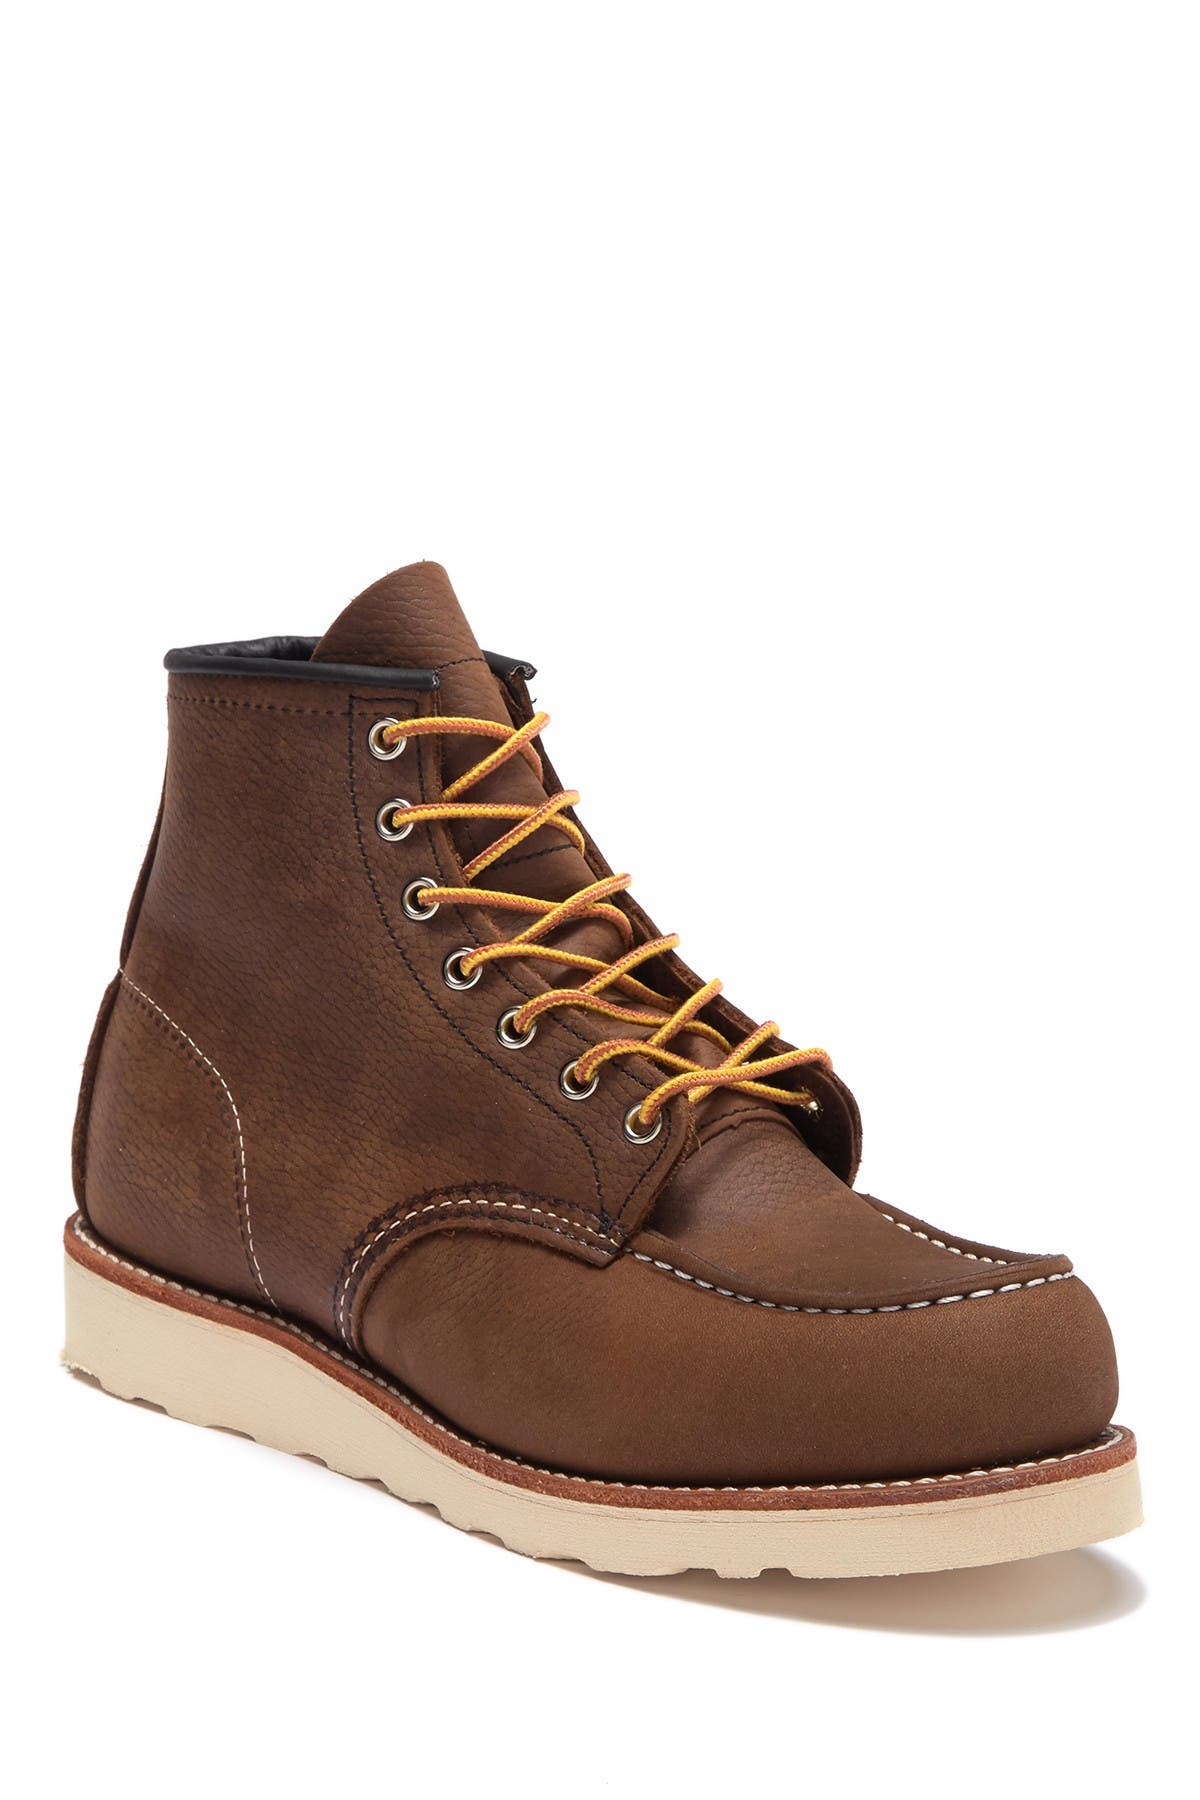 red wing boots 6 inch moc